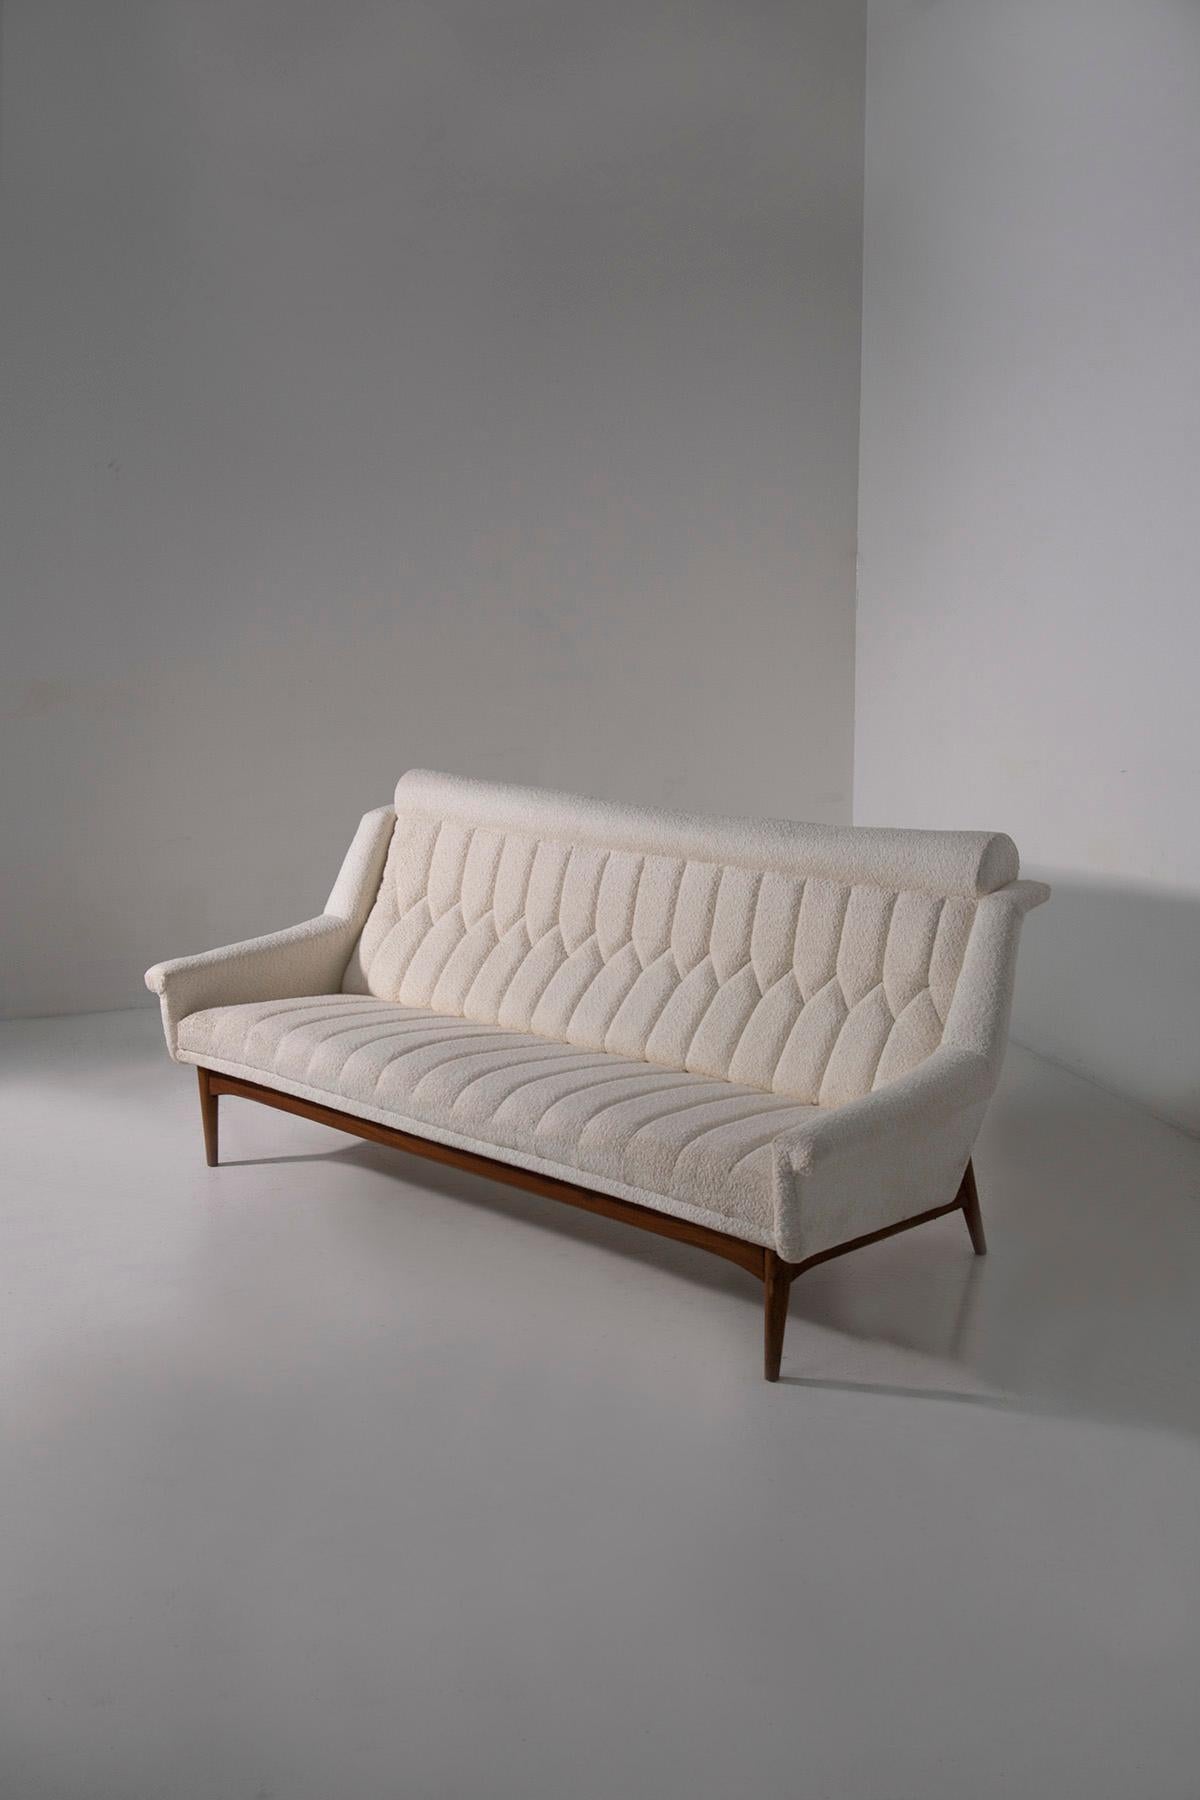 Step into the enchanting world of mid-century elegance with this exquisite Danish modernist sofa hailing from the 1950s. It embodies the quintessential forms of European Nordic design, each curve and angle a testament to the era's refined aesthetic